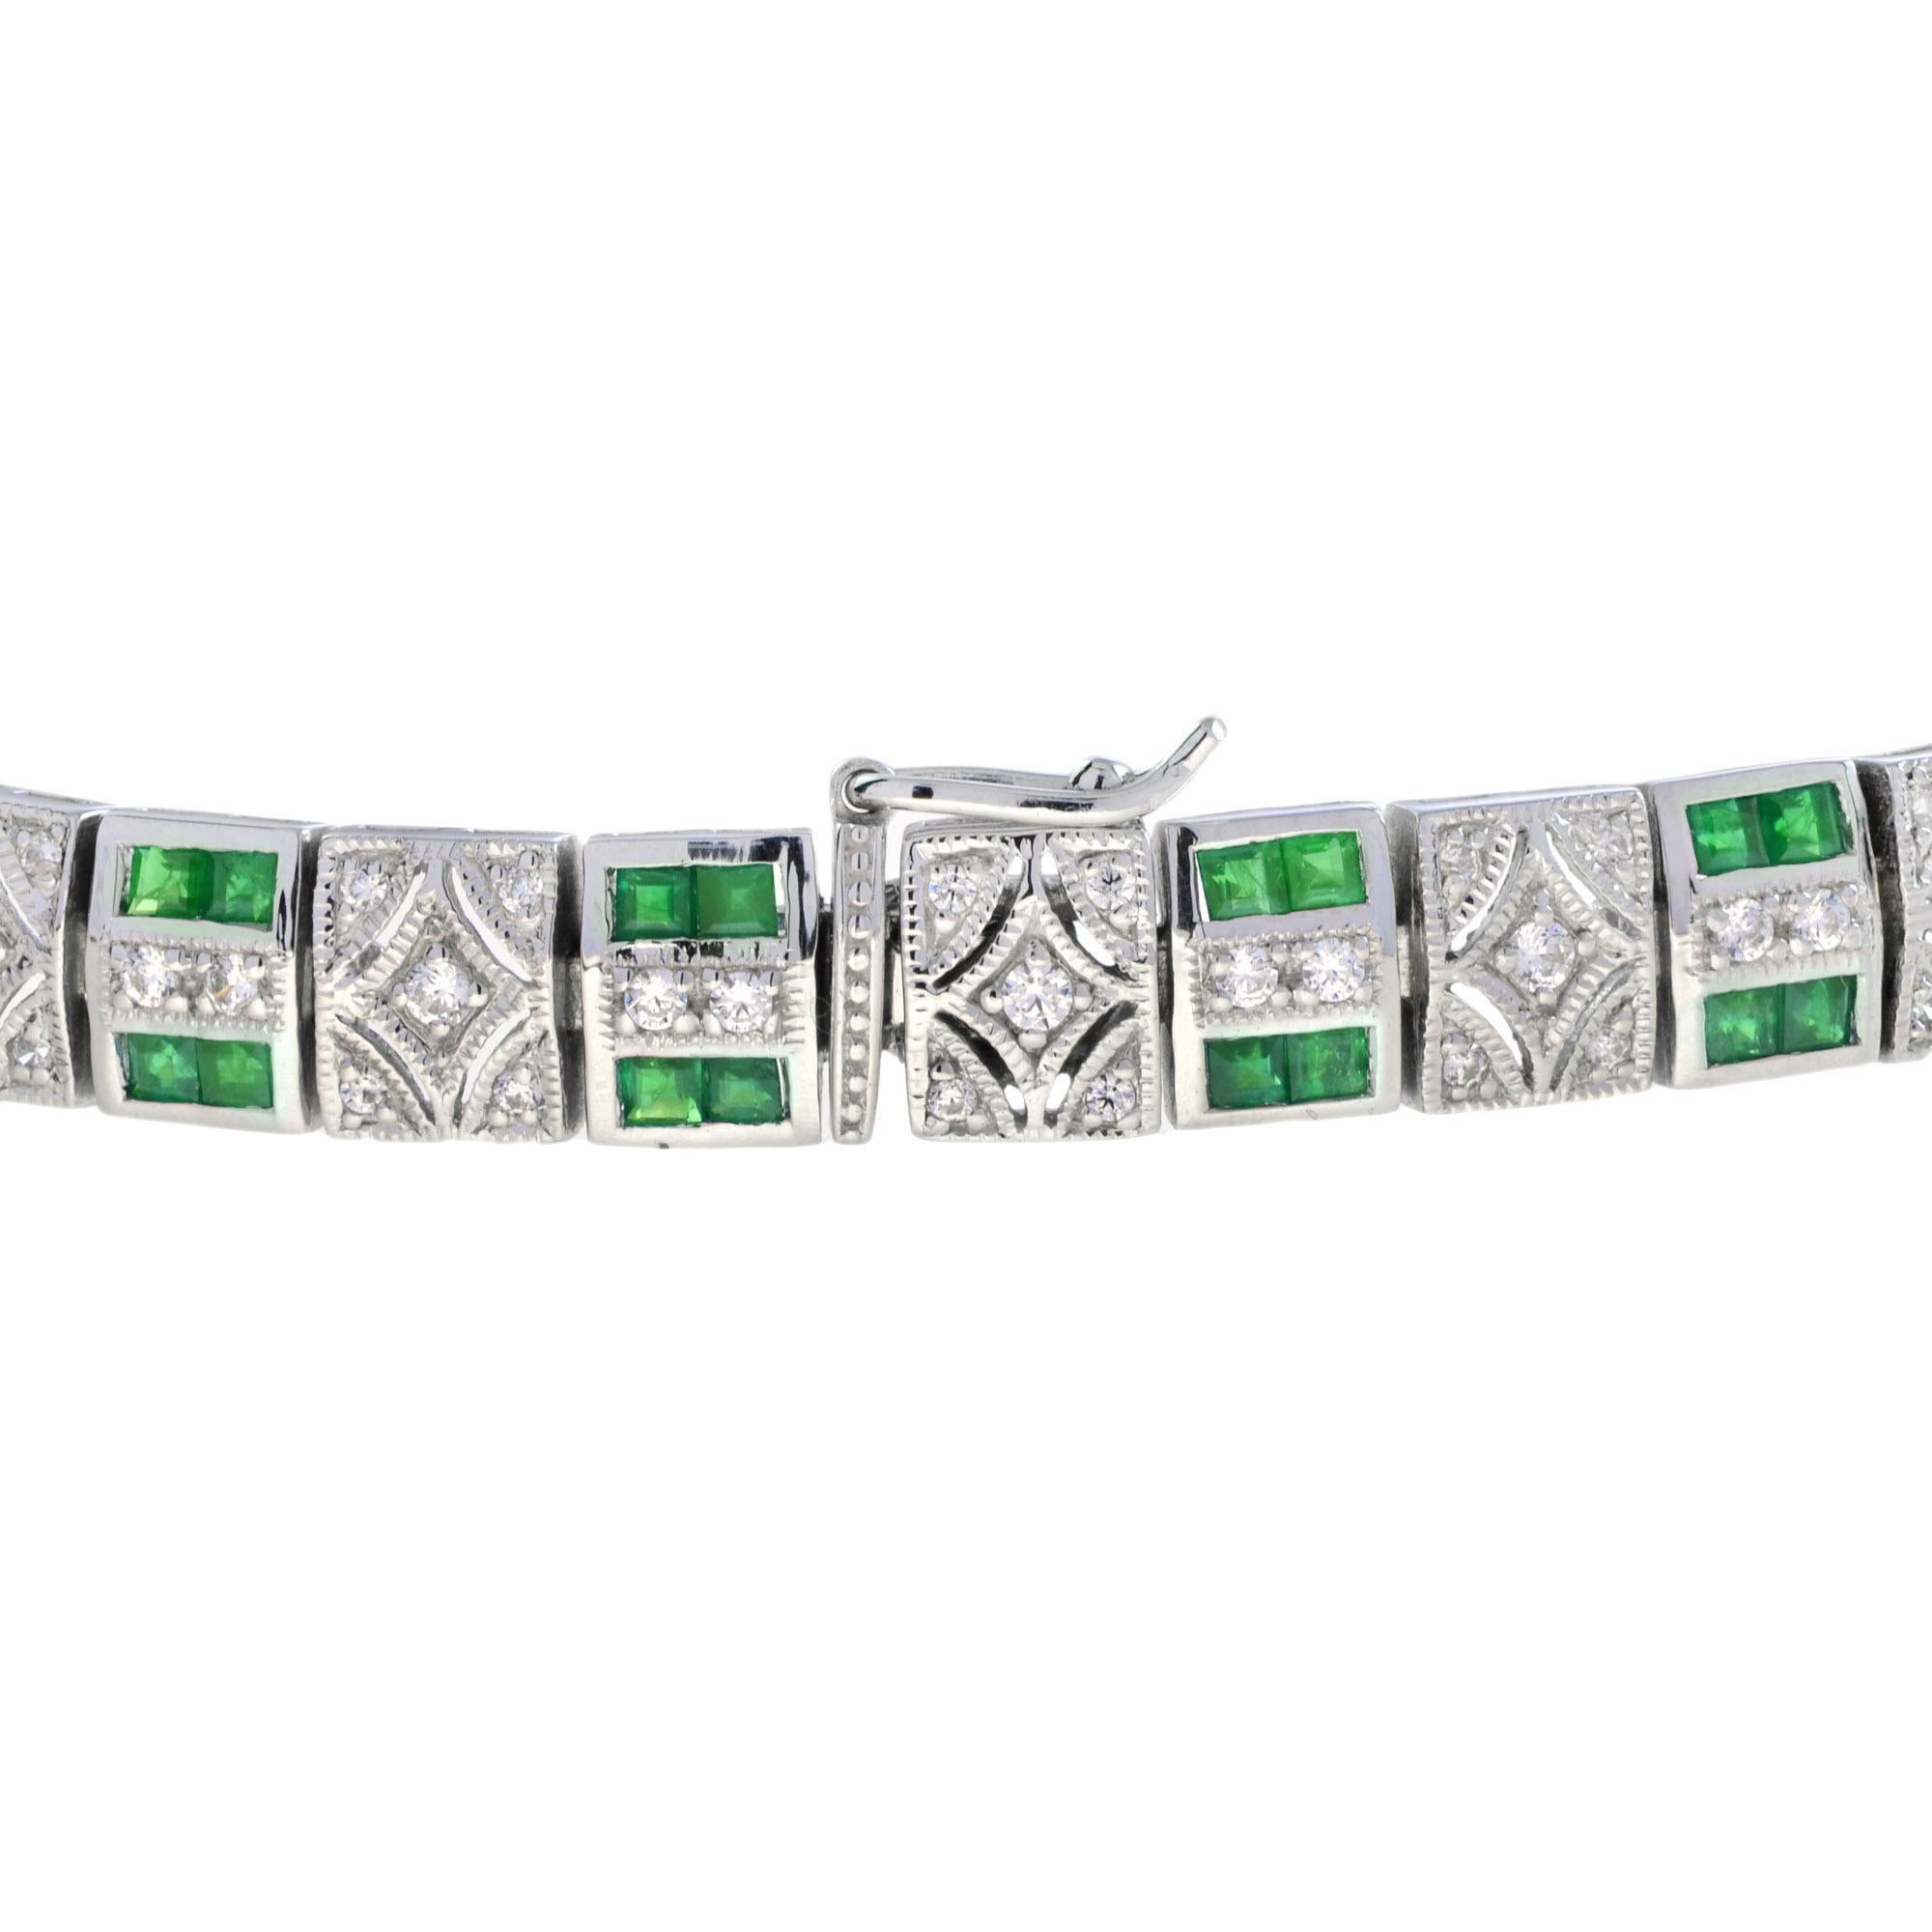 Art Deco Style Emerald and Diamond Earrings & Bracelet in White Gold For Sale 4